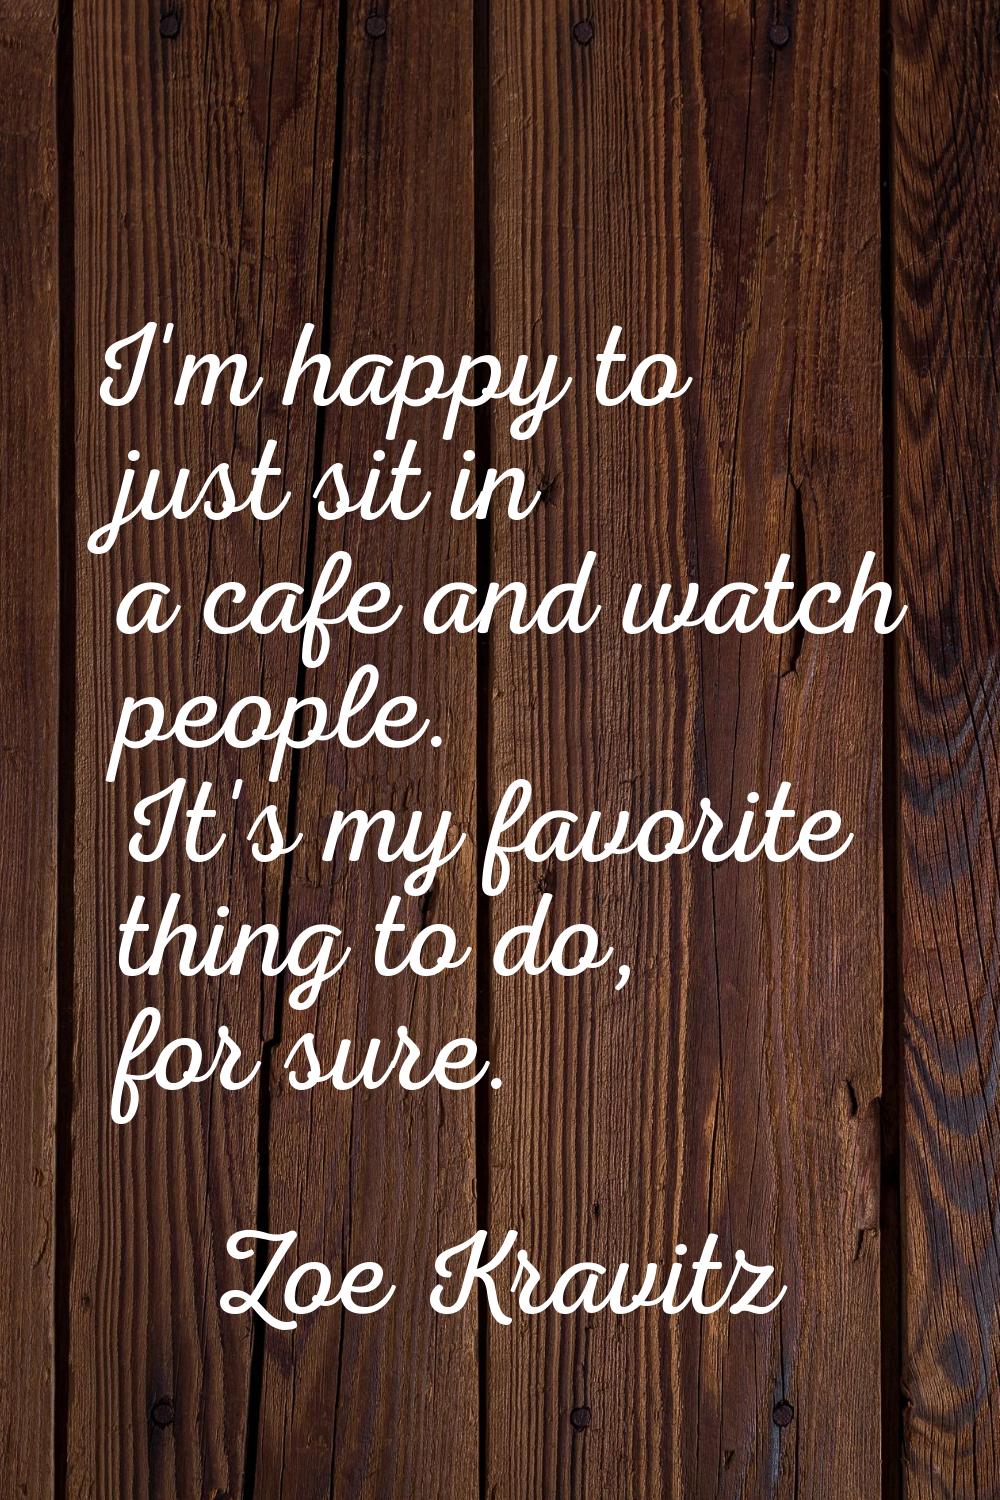 I'm happy to just sit in a cafe and watch people. It's my favorite thing to do, for sure.